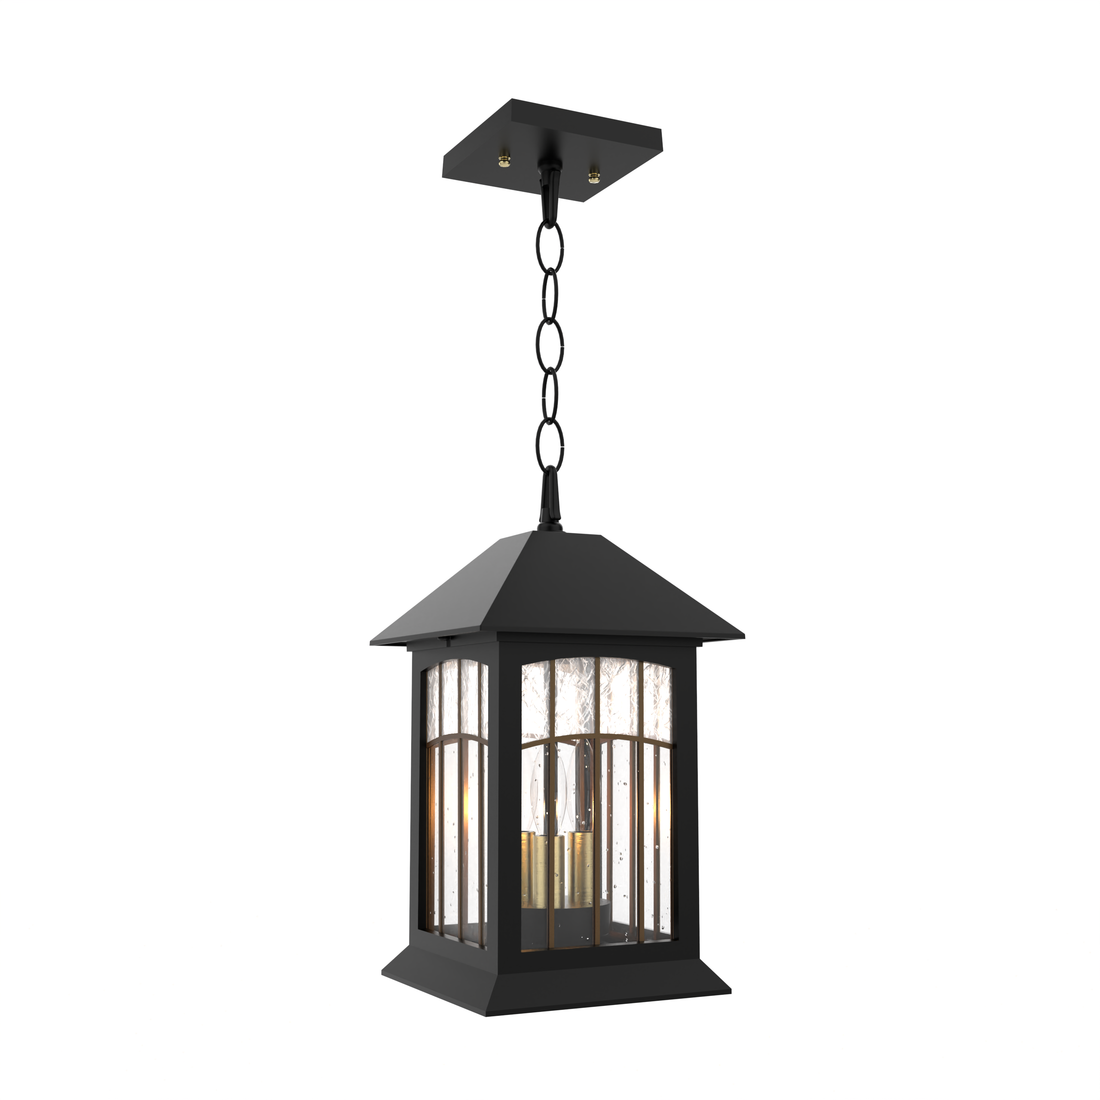 Havana - Ceiling mounting with chain open bottom medium size - 23850